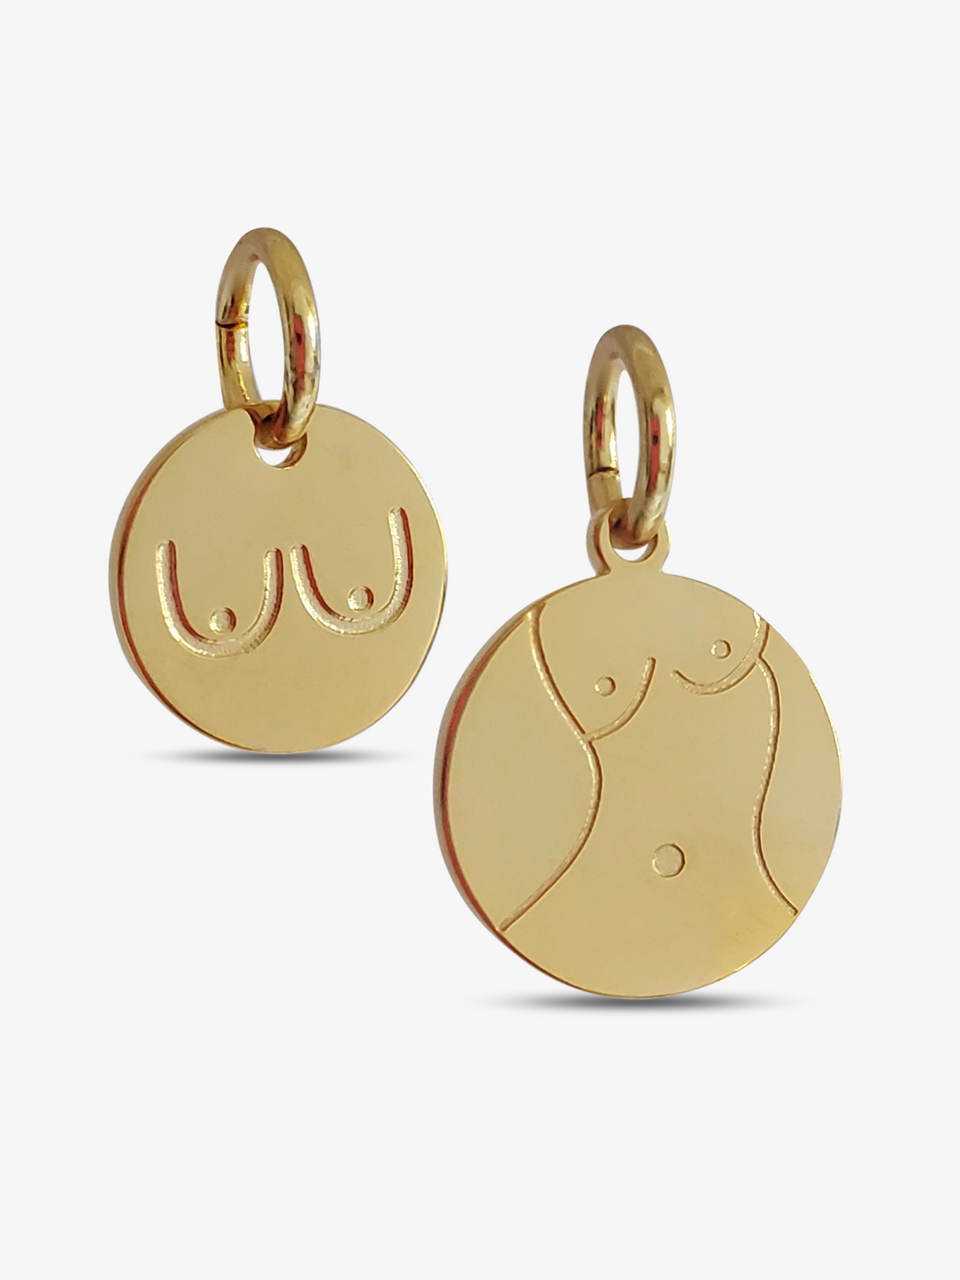 Fay Gold Body or Boobs Coin Bracelet Charm Stainless Steel Body